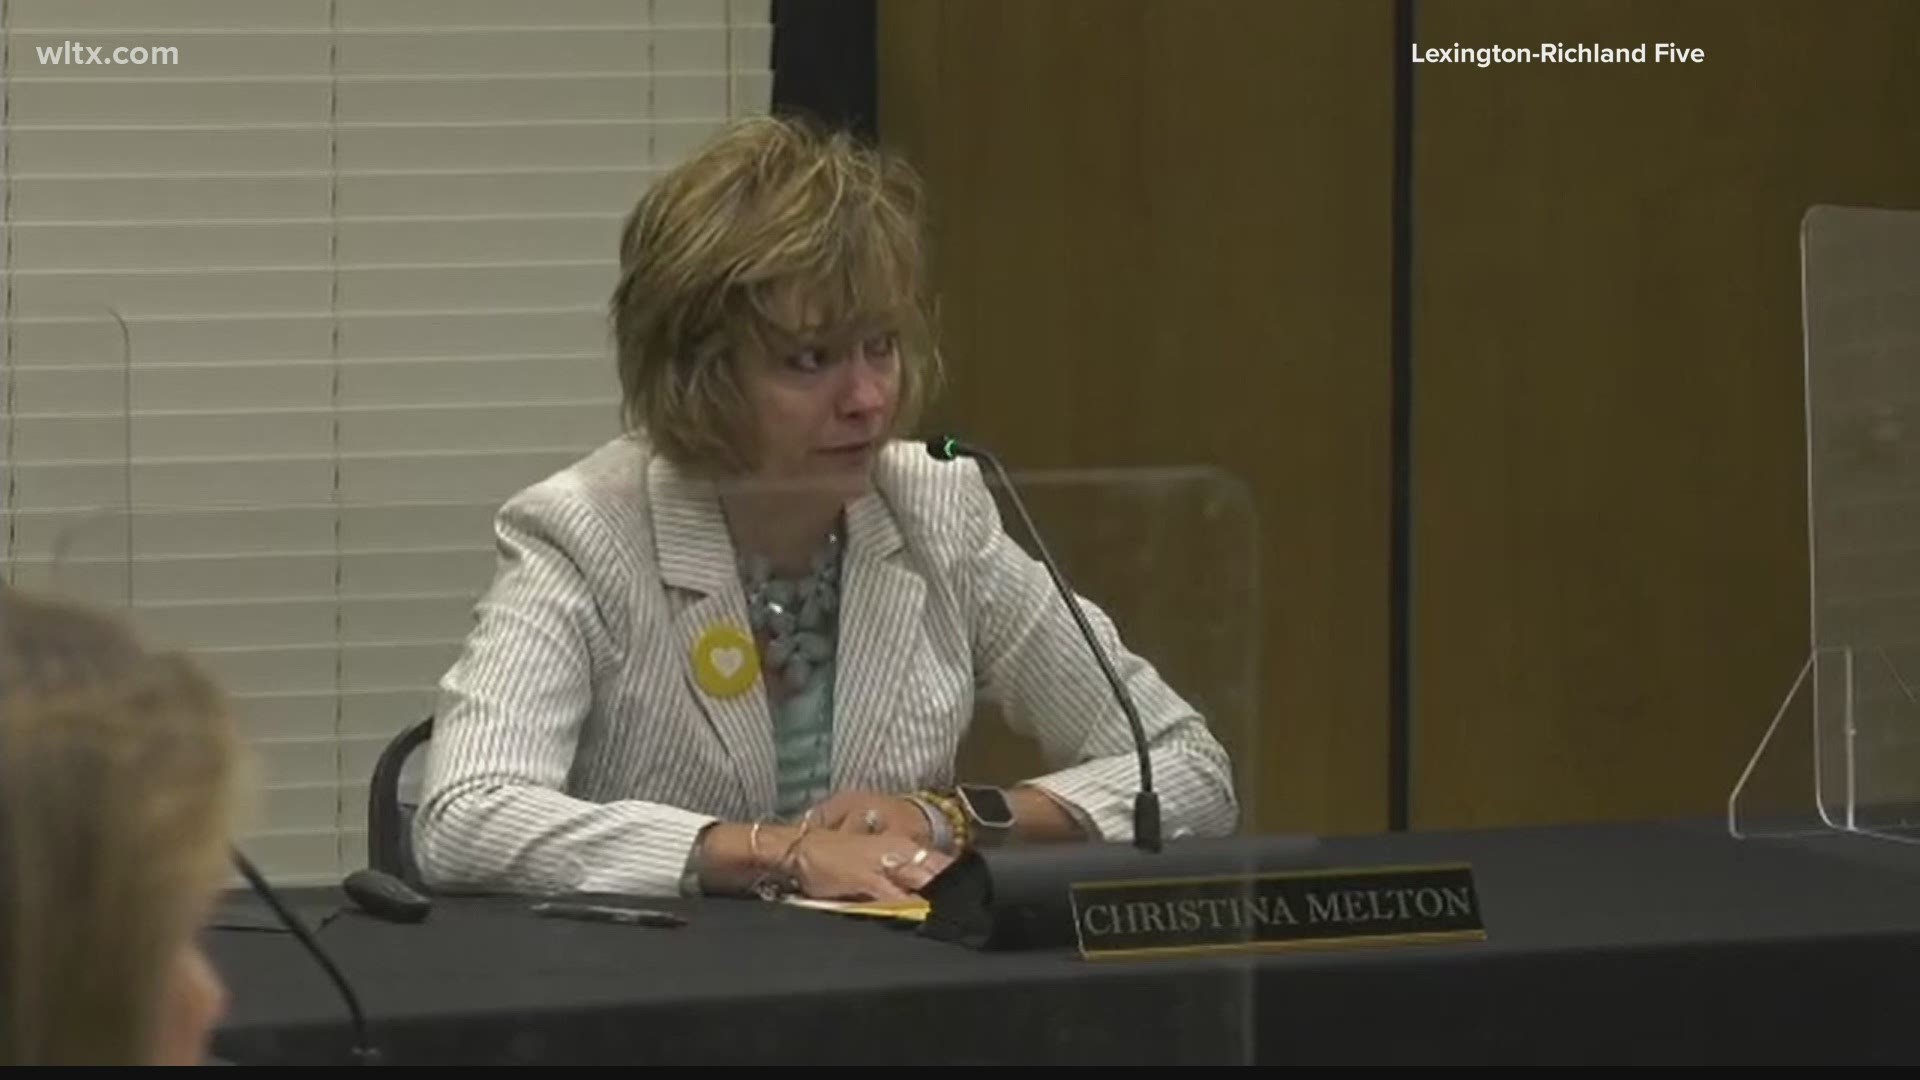 Dr. Christina Melton abruptly ended her term as superintendent of the district.